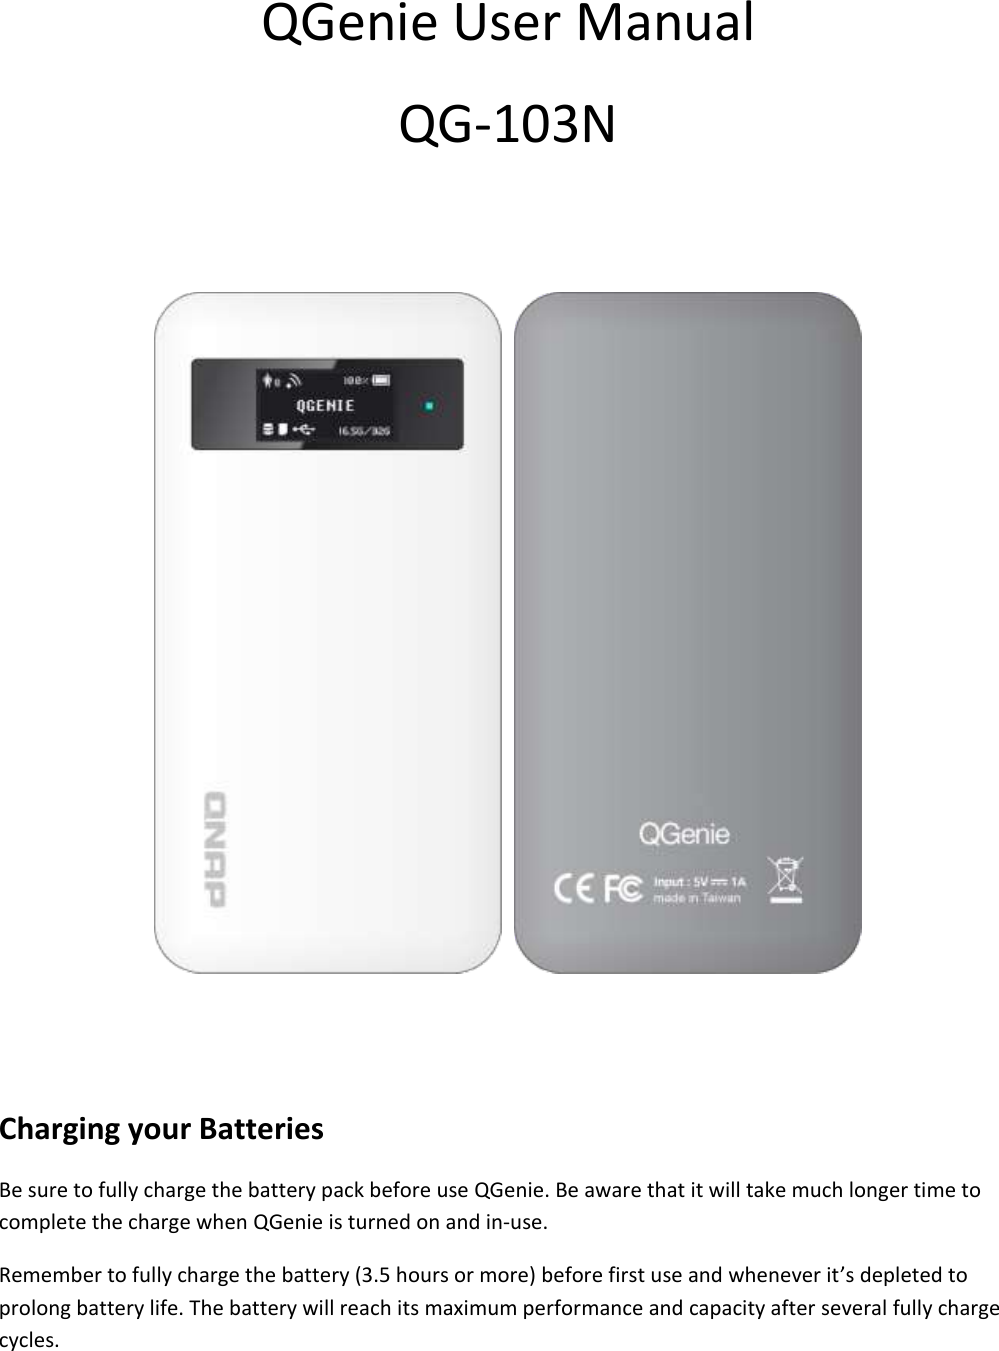 QGenie User Manual QG-103N Charging your Batteries Be sure to fully charge the battery pack before use QGenie. Be aware that it will take much longer time to complete the charge when QGenie is turned on and in-use. Remember to fully charge the battery (3.5 hours or more) before first use and whenever it’s depleted to prolong battery life. The battery will reach its maximum performance and capacity after several fully charge cycles.